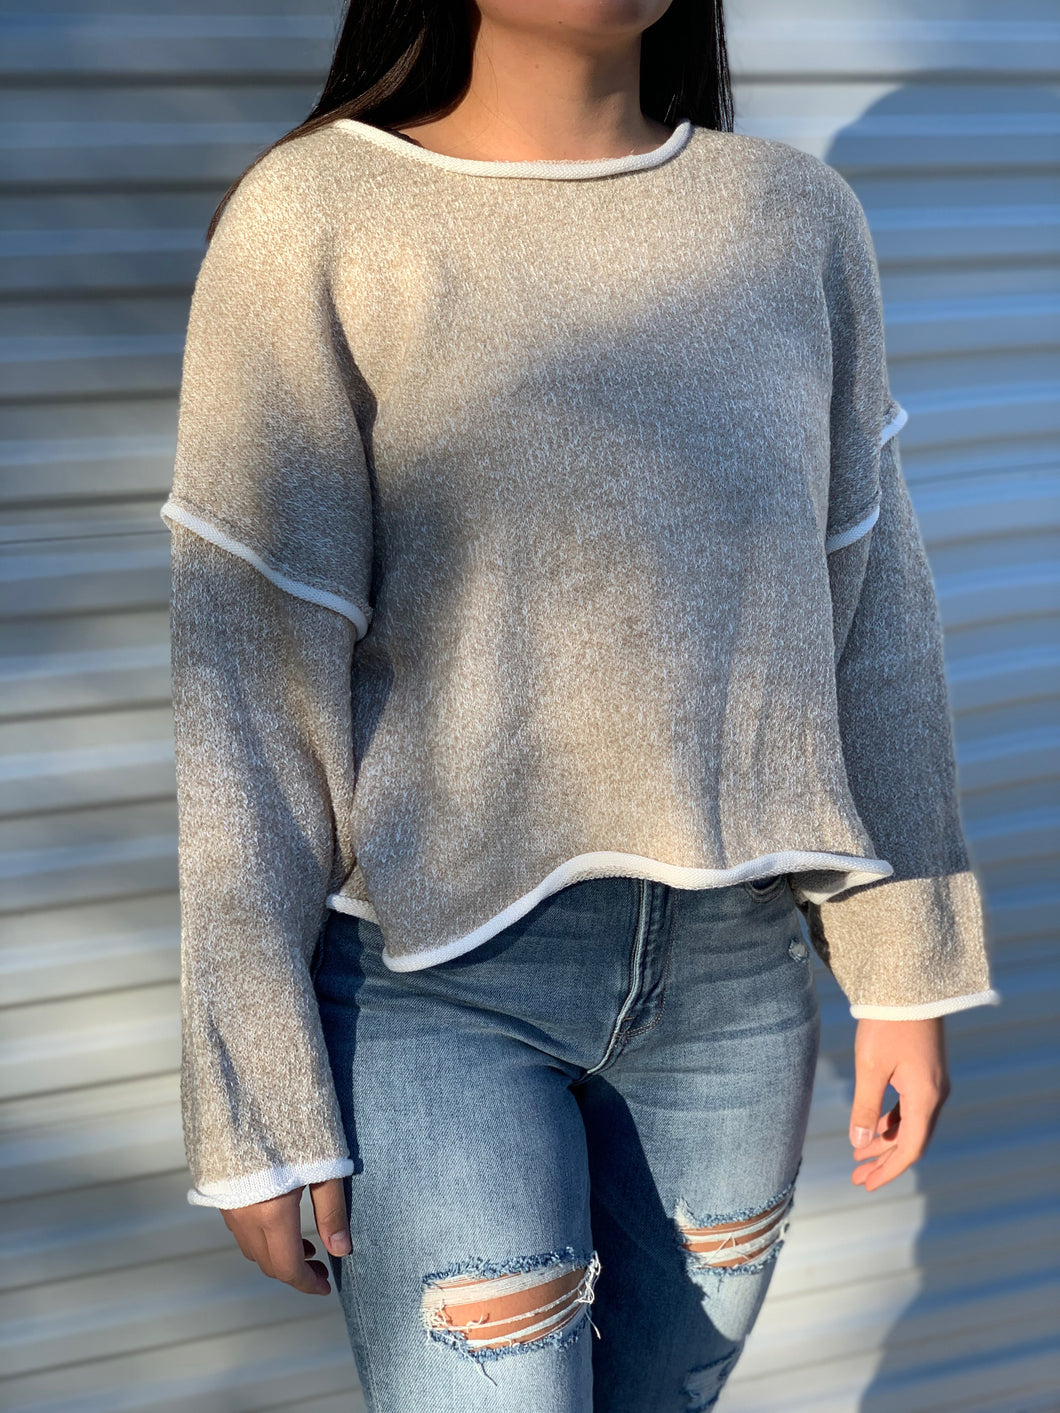 Relaxed Fit Knit Sweater